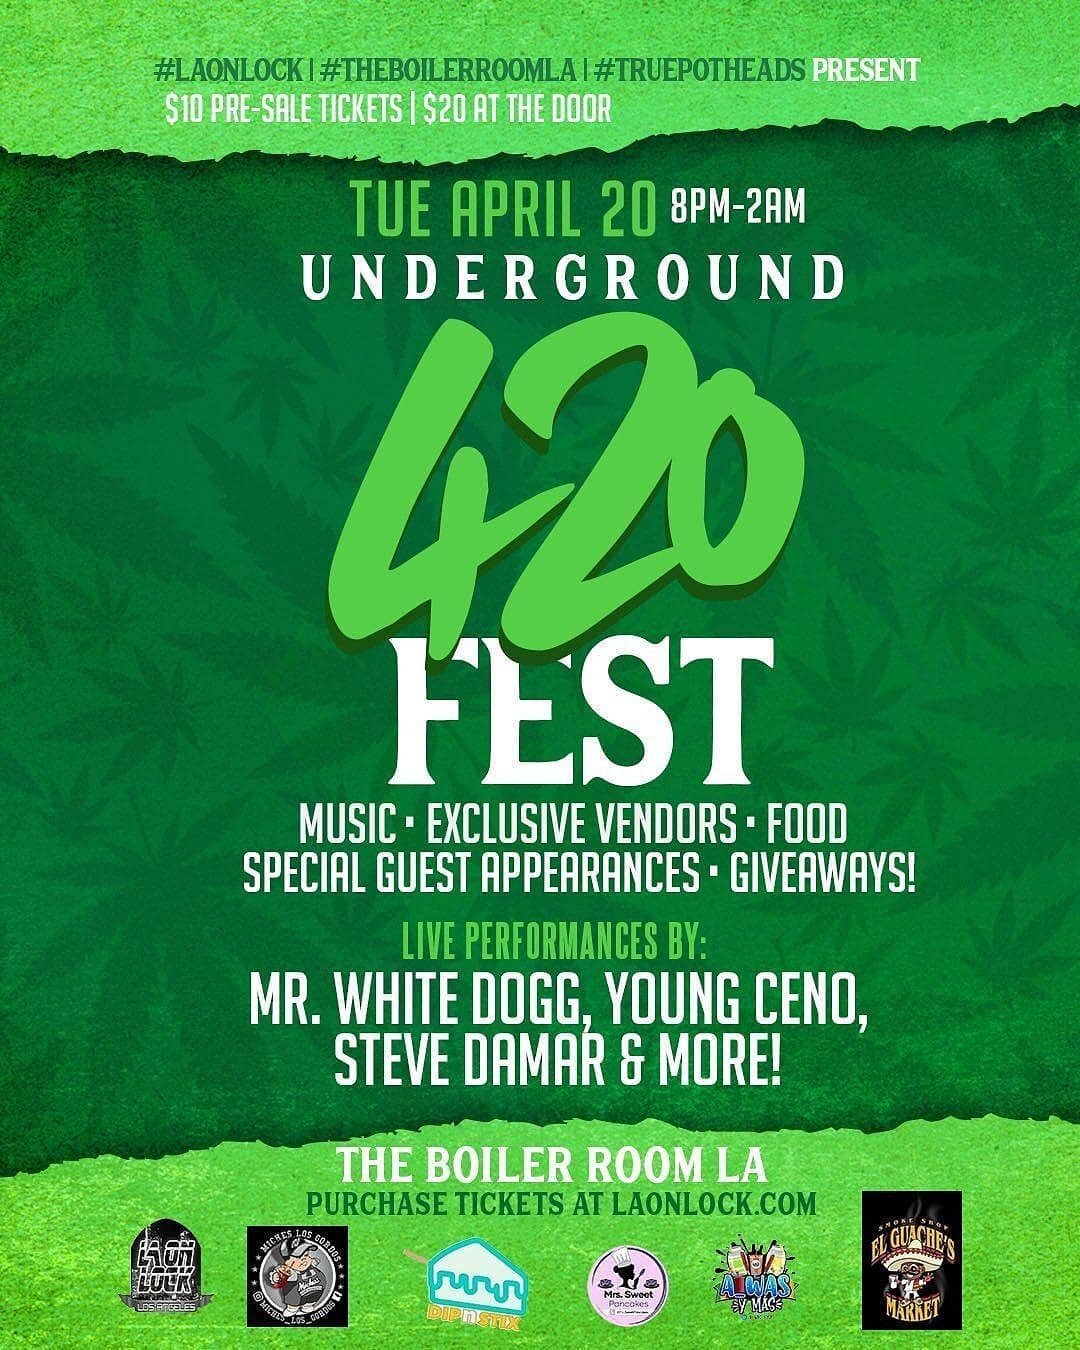 #TheBoilerRoomLA | #LAOnLock | #TruePotheads Present:

#Underground420Fest 

4.20.21 &bull; Tuesday &bull; 8pm-2am
The Boiler Room LA

$10 Pre-Sale &bull; $20 at the door

Music &bull; Exclusive Vendors &bull; Food &bull; Special Guest Appearances &b